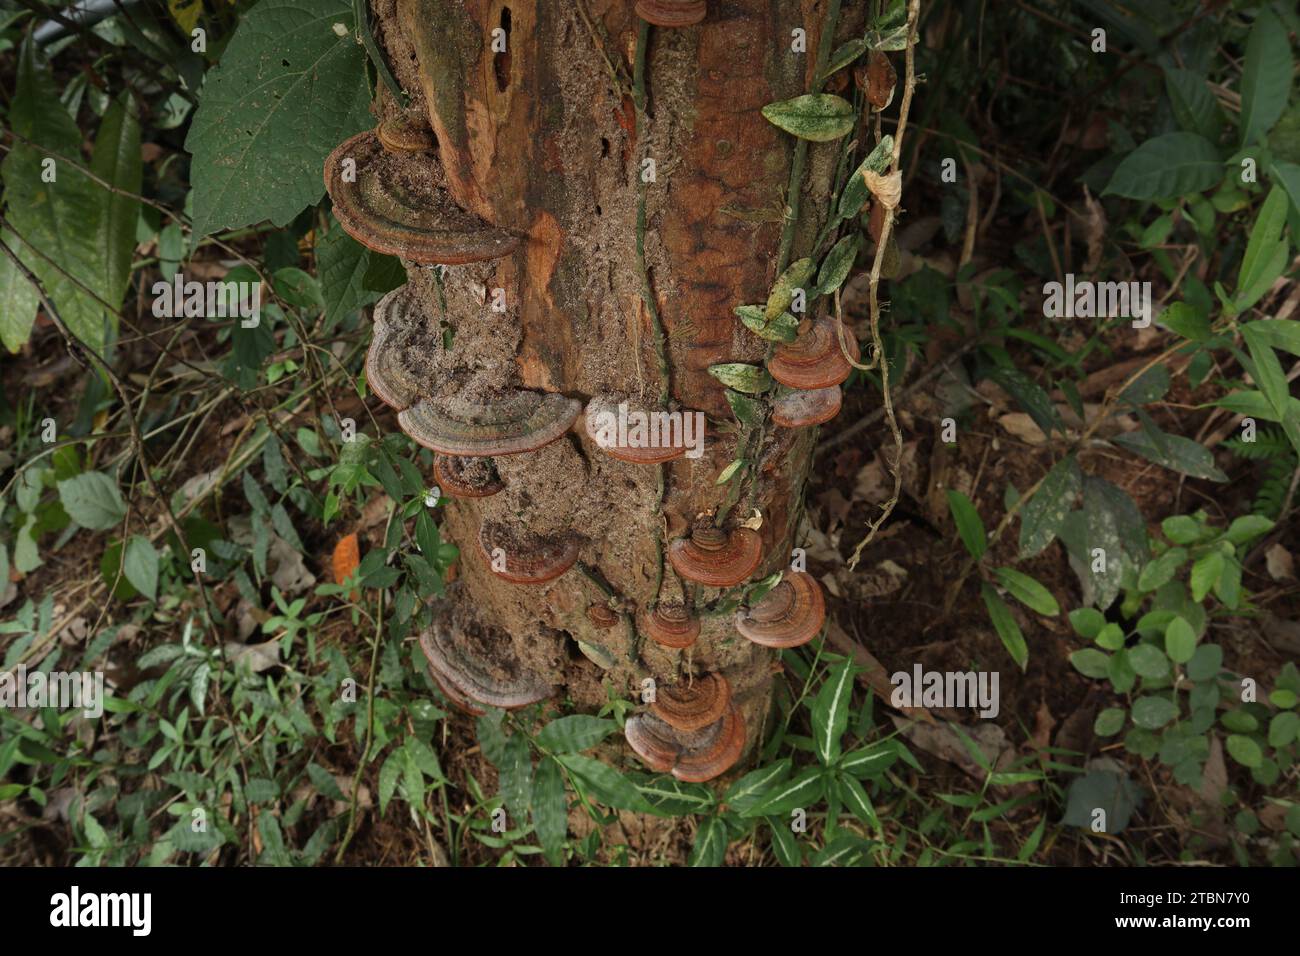 High angle view of a decaying tree trunk with brown colored Ganoderma genus bracket mushrooms growing in a forested area Stock Photo